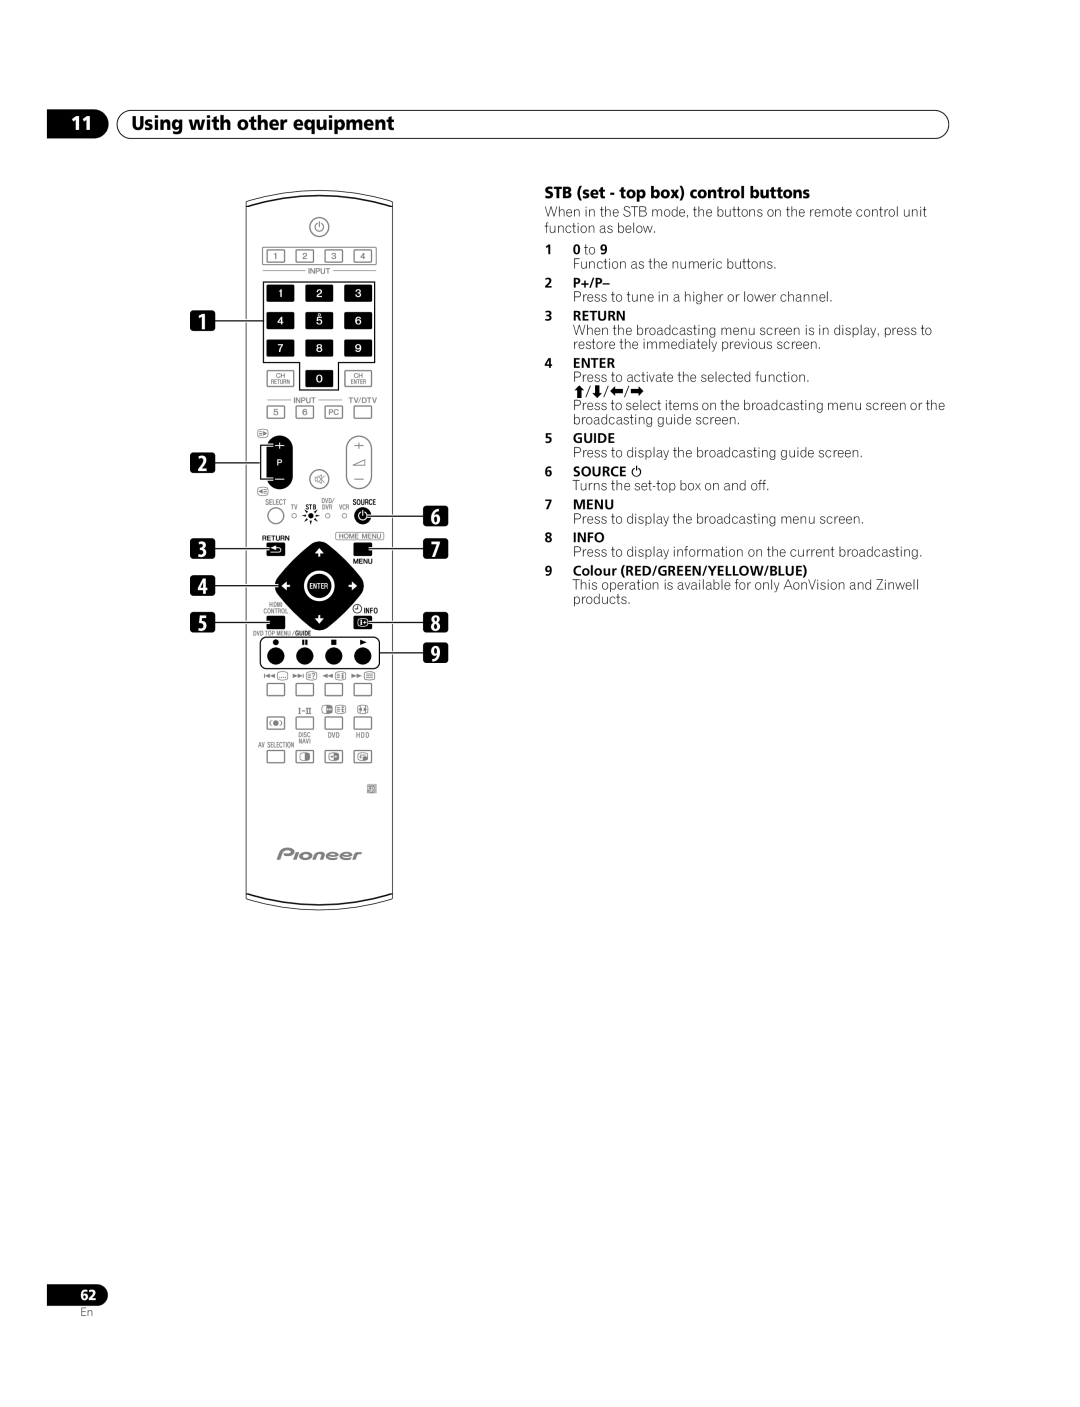 Pioneer PDP-428XDA STB set - top box control buttons, Using with other equipment, 1 0 to, 2 P+/P, Return, Enter, Guide 